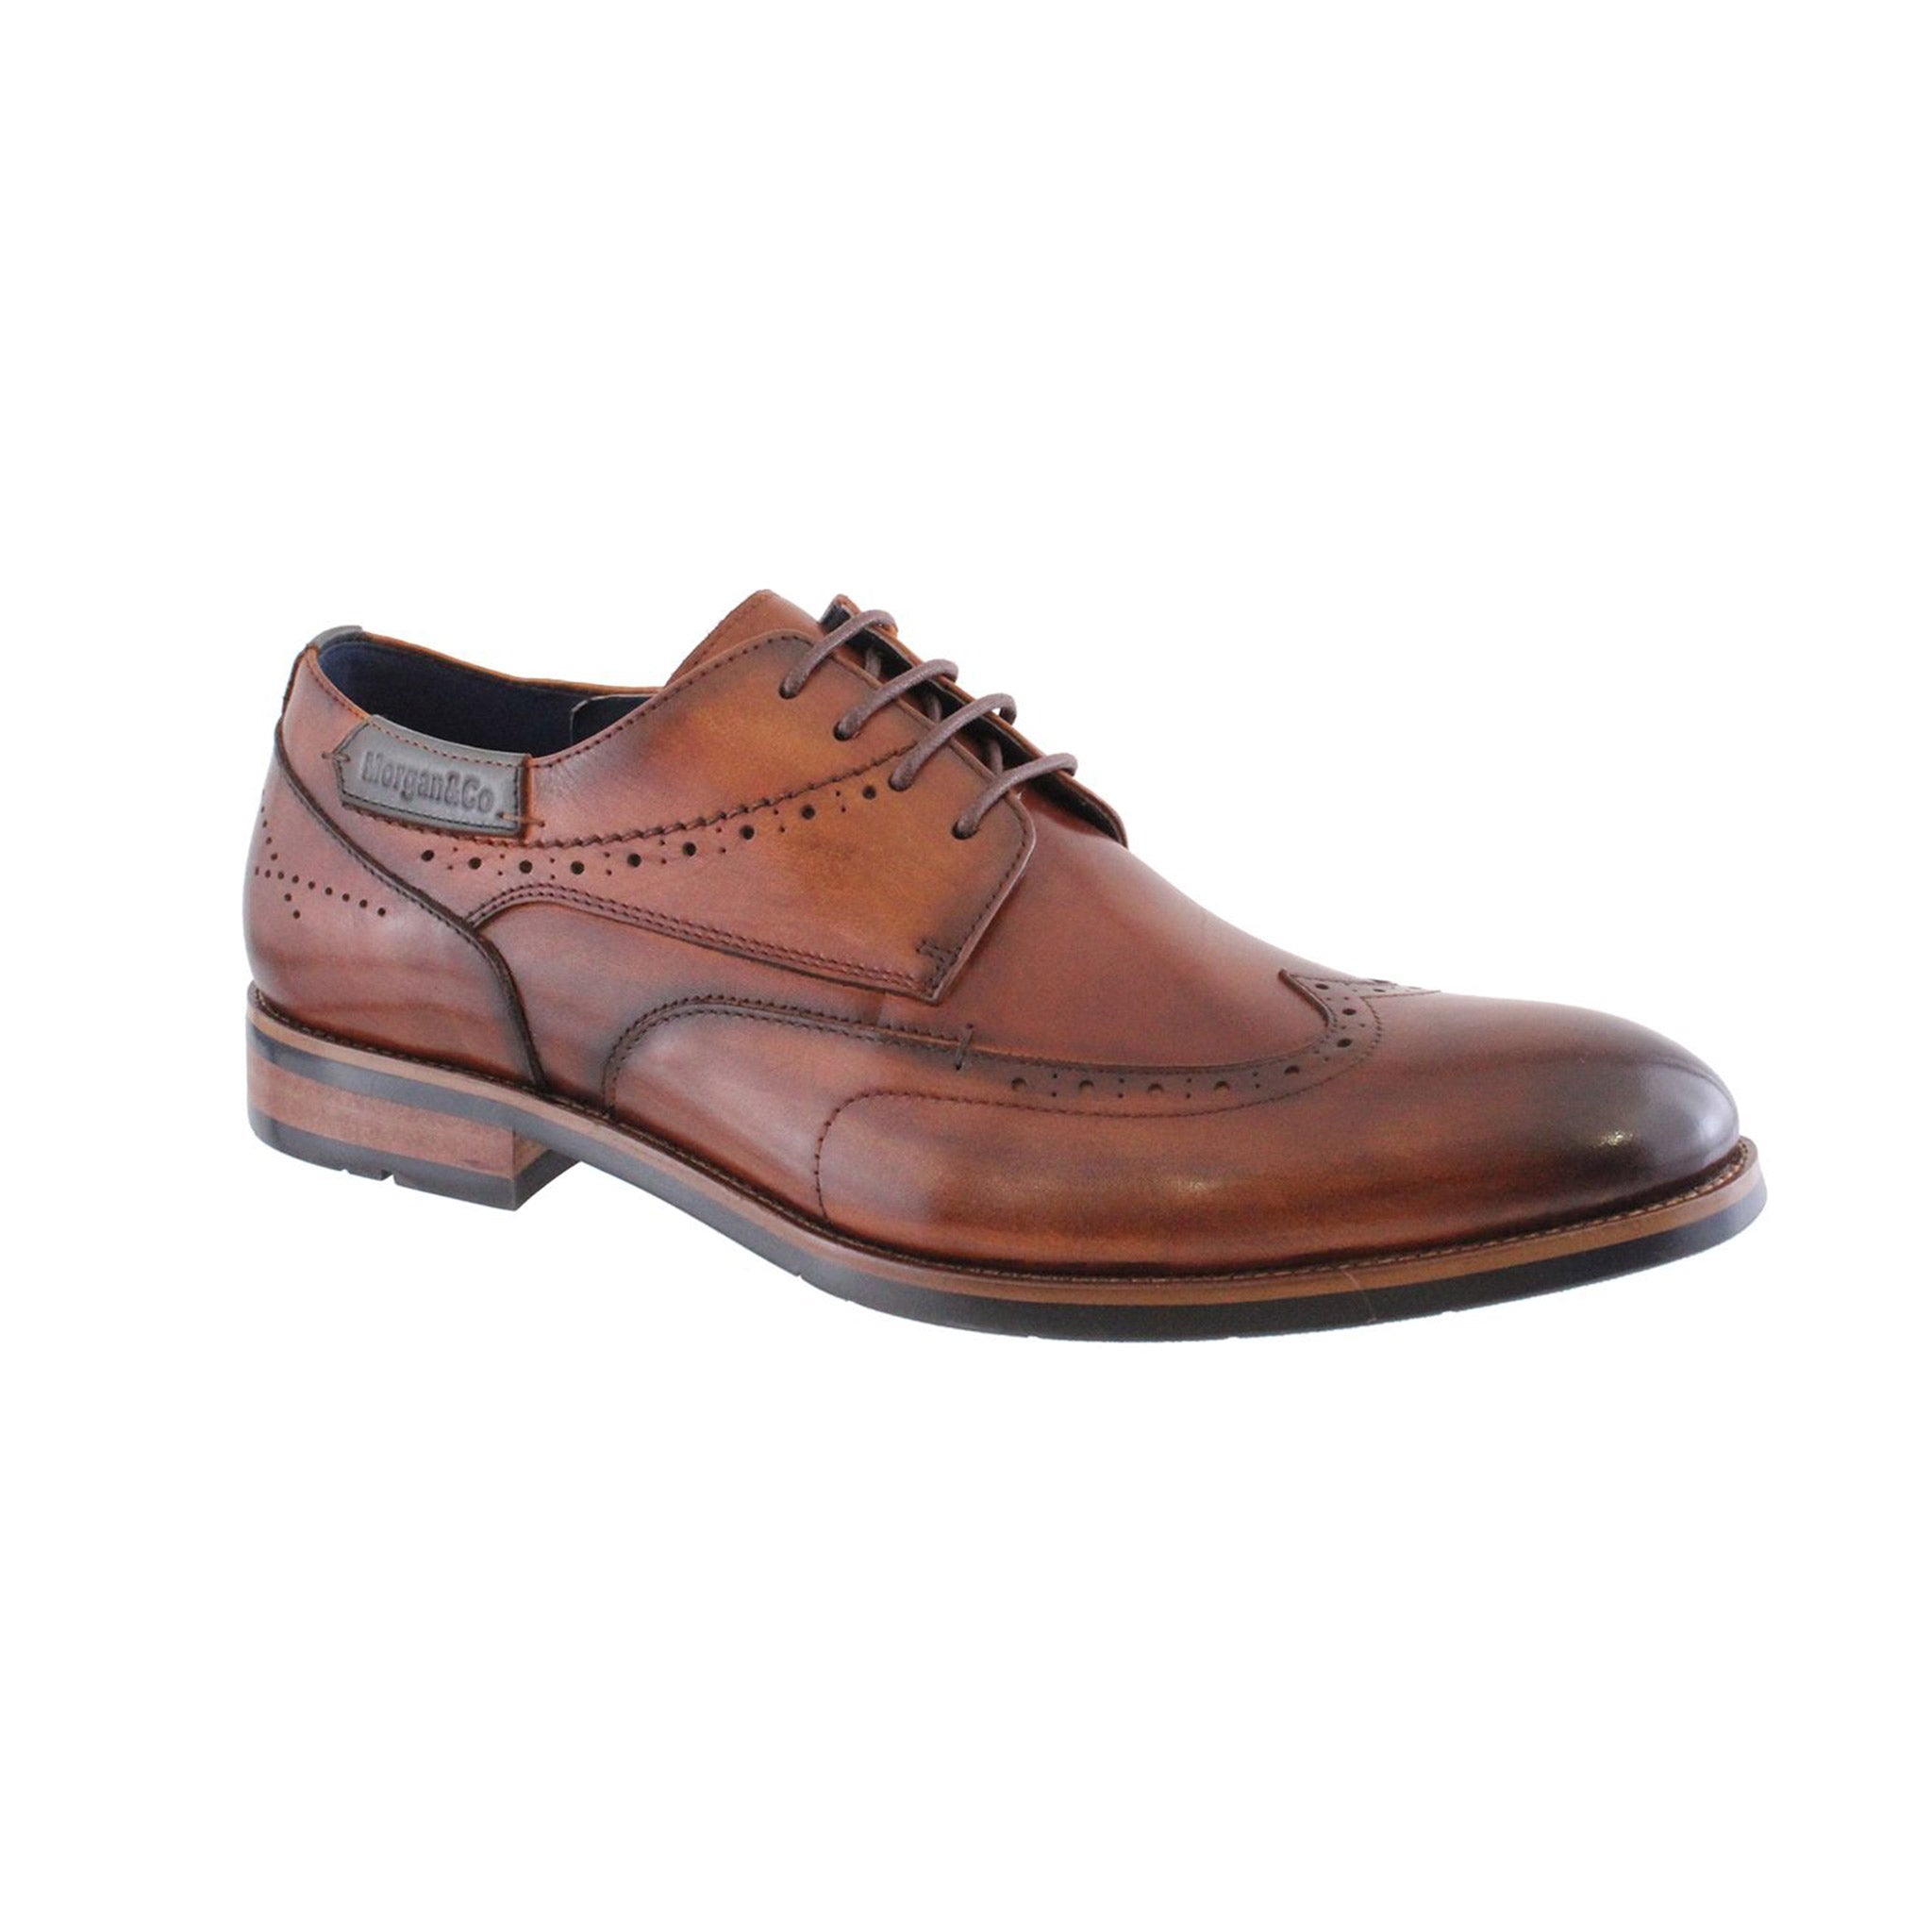 Leather Shoe by Morgan & Co called MGN1110